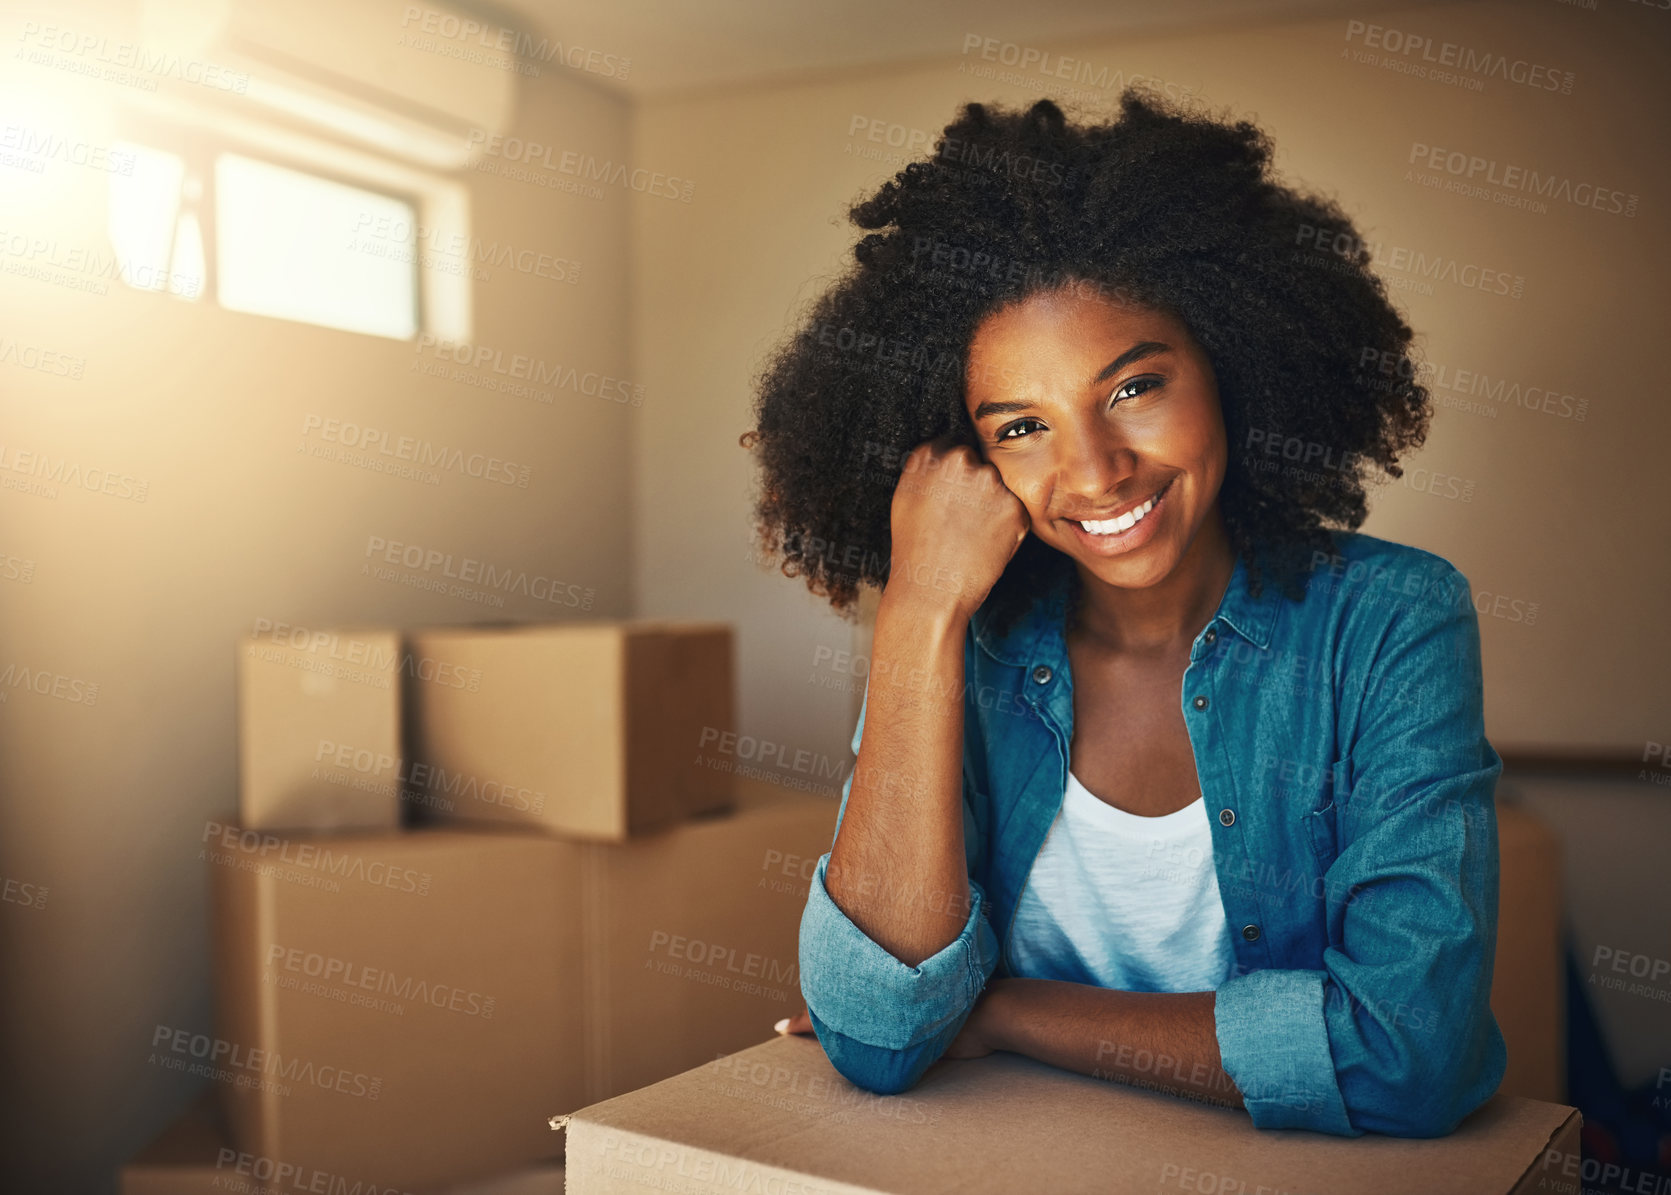 Buy stock photo Portrait of a cheerful young woman resting on her hand while being surrounded by cardboard boxes on moving day inside at home